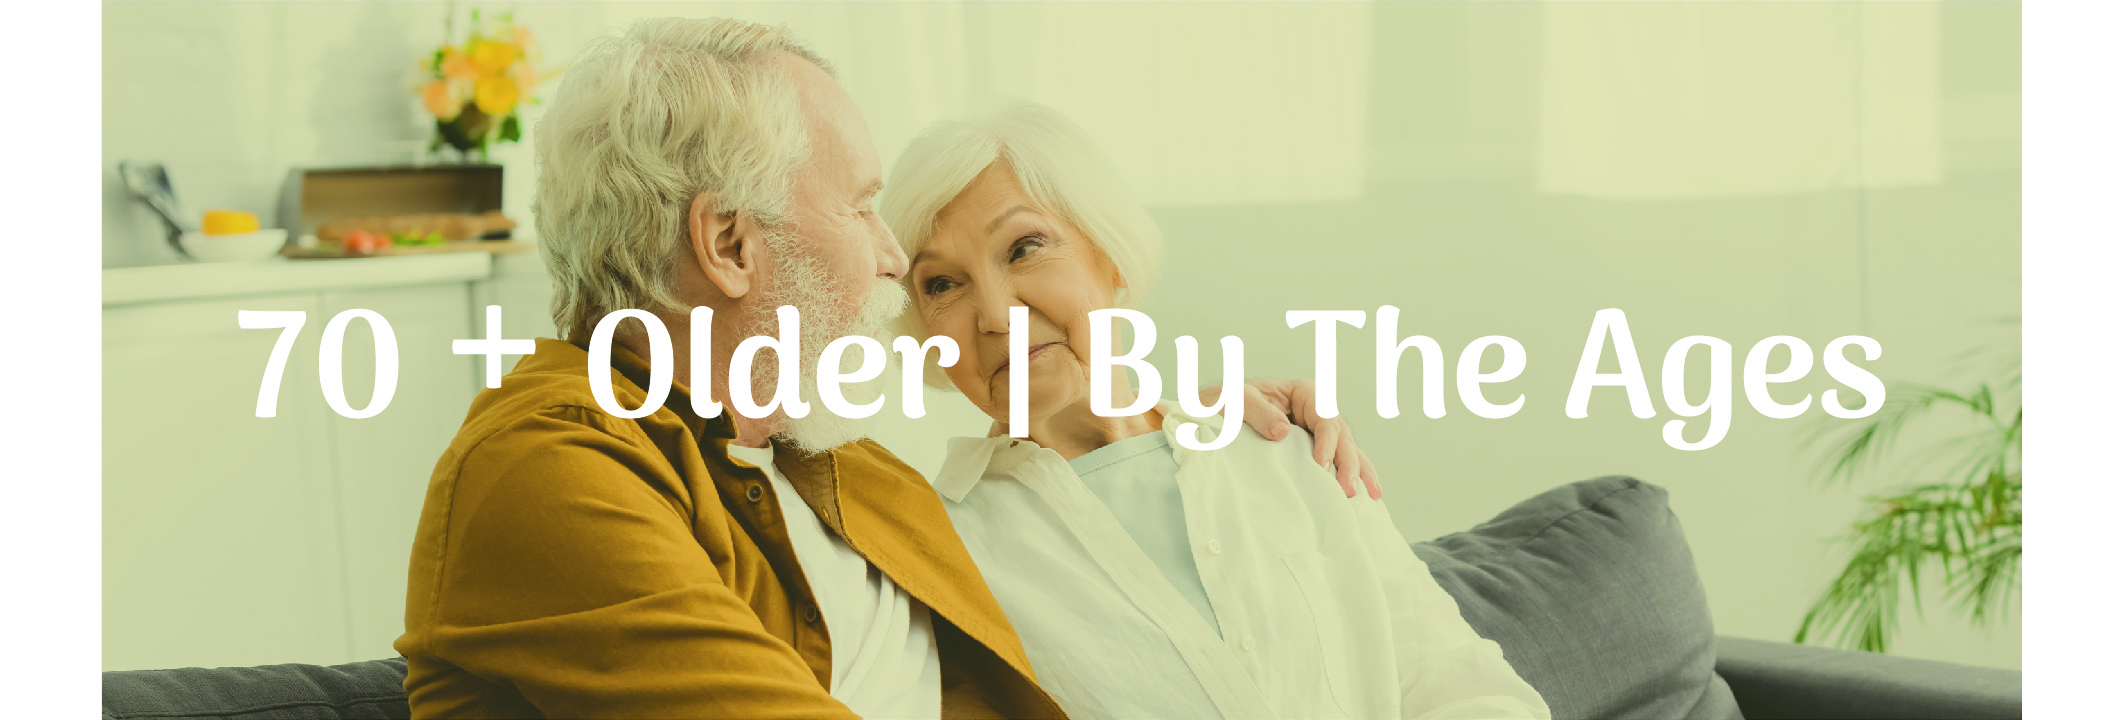 70 + Older | Life Insurance with Extended-Care Riders